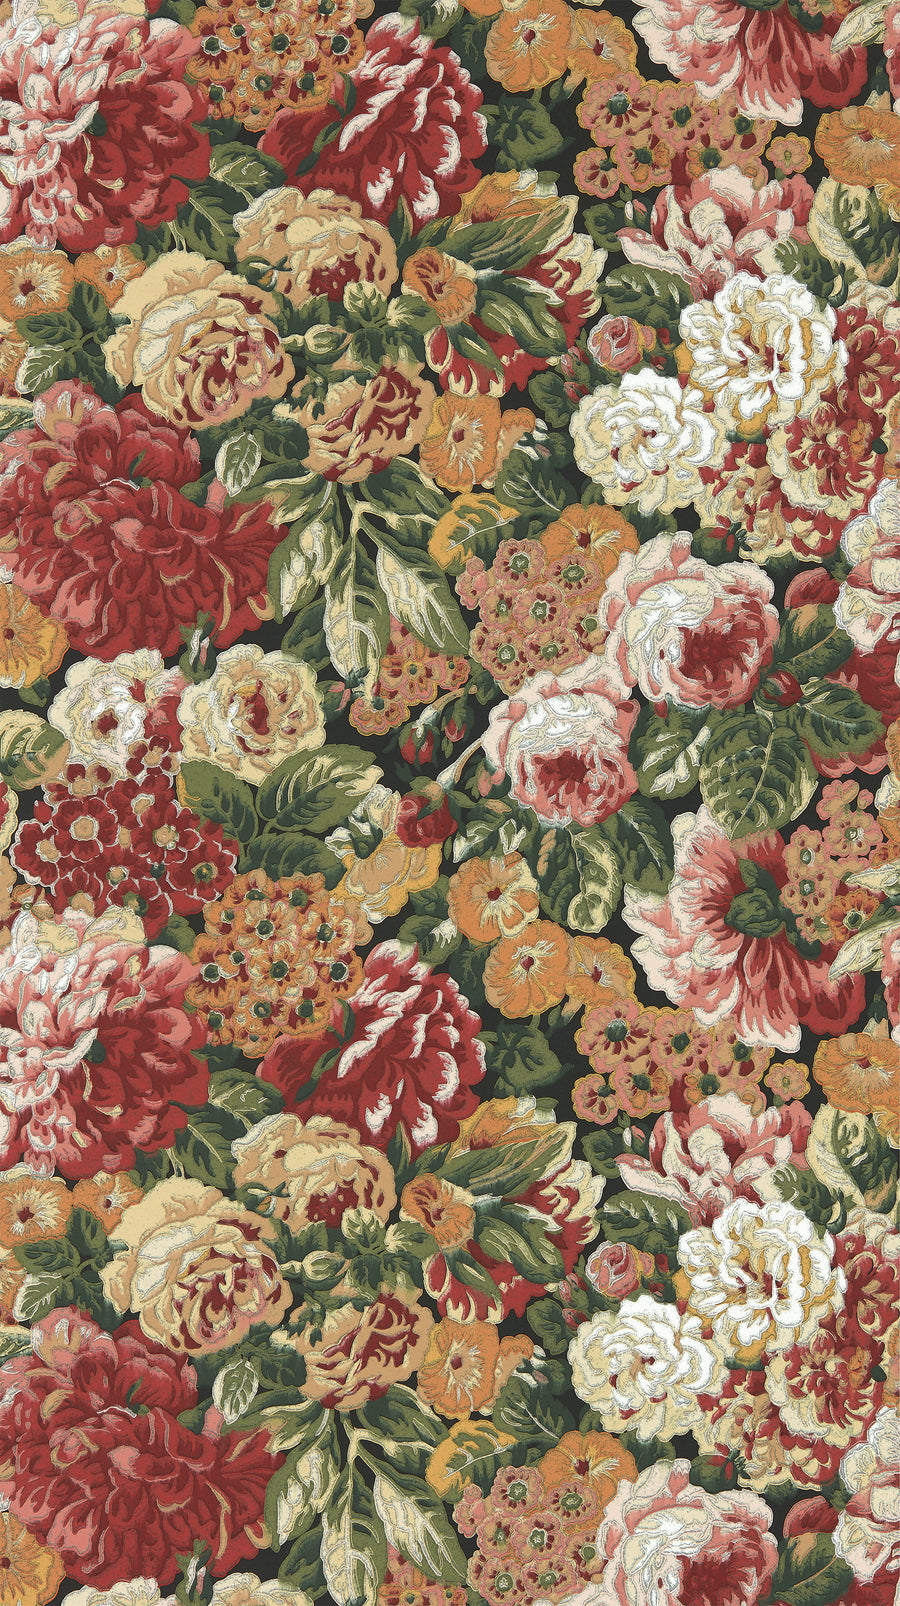 Sanderson / ONE SIXTY WALLPAPER COLLECTION / Rose And Peony Amanpuri Red / Devon Green 217028